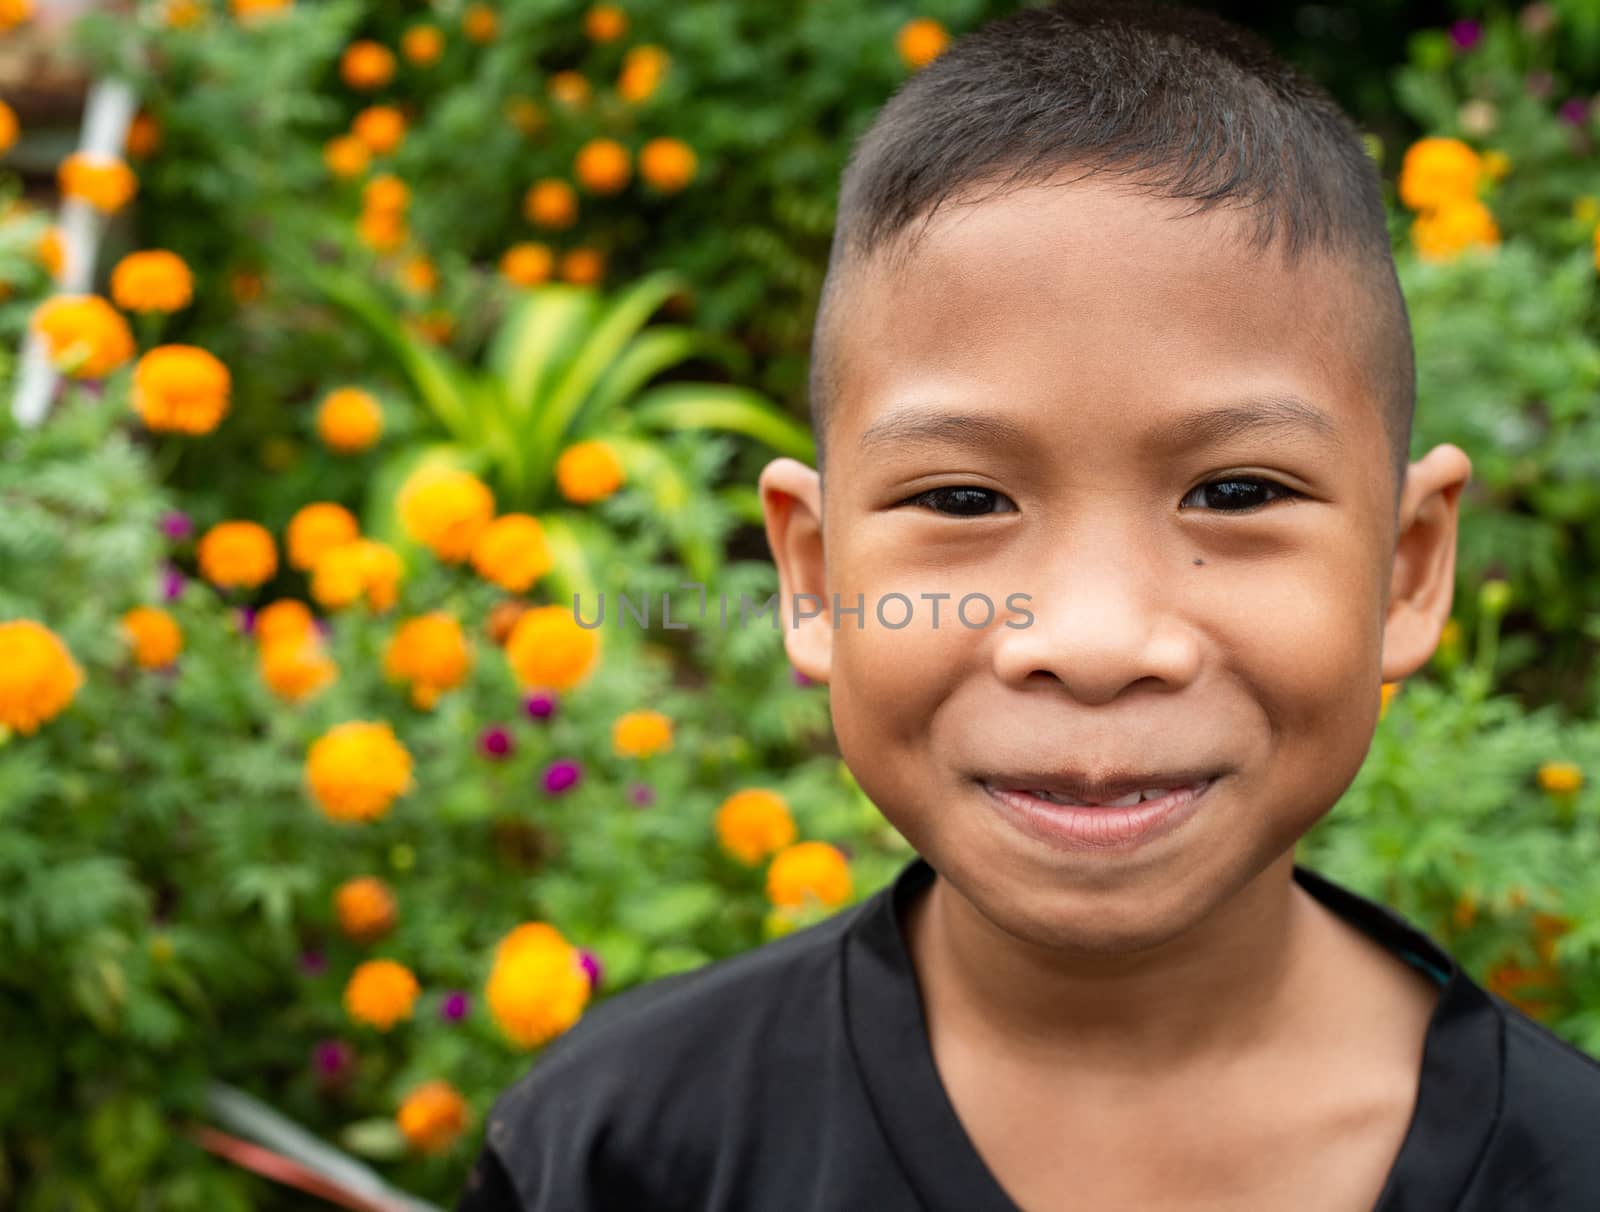 Boy smiling face portrait On a garden background. by Unimages2527